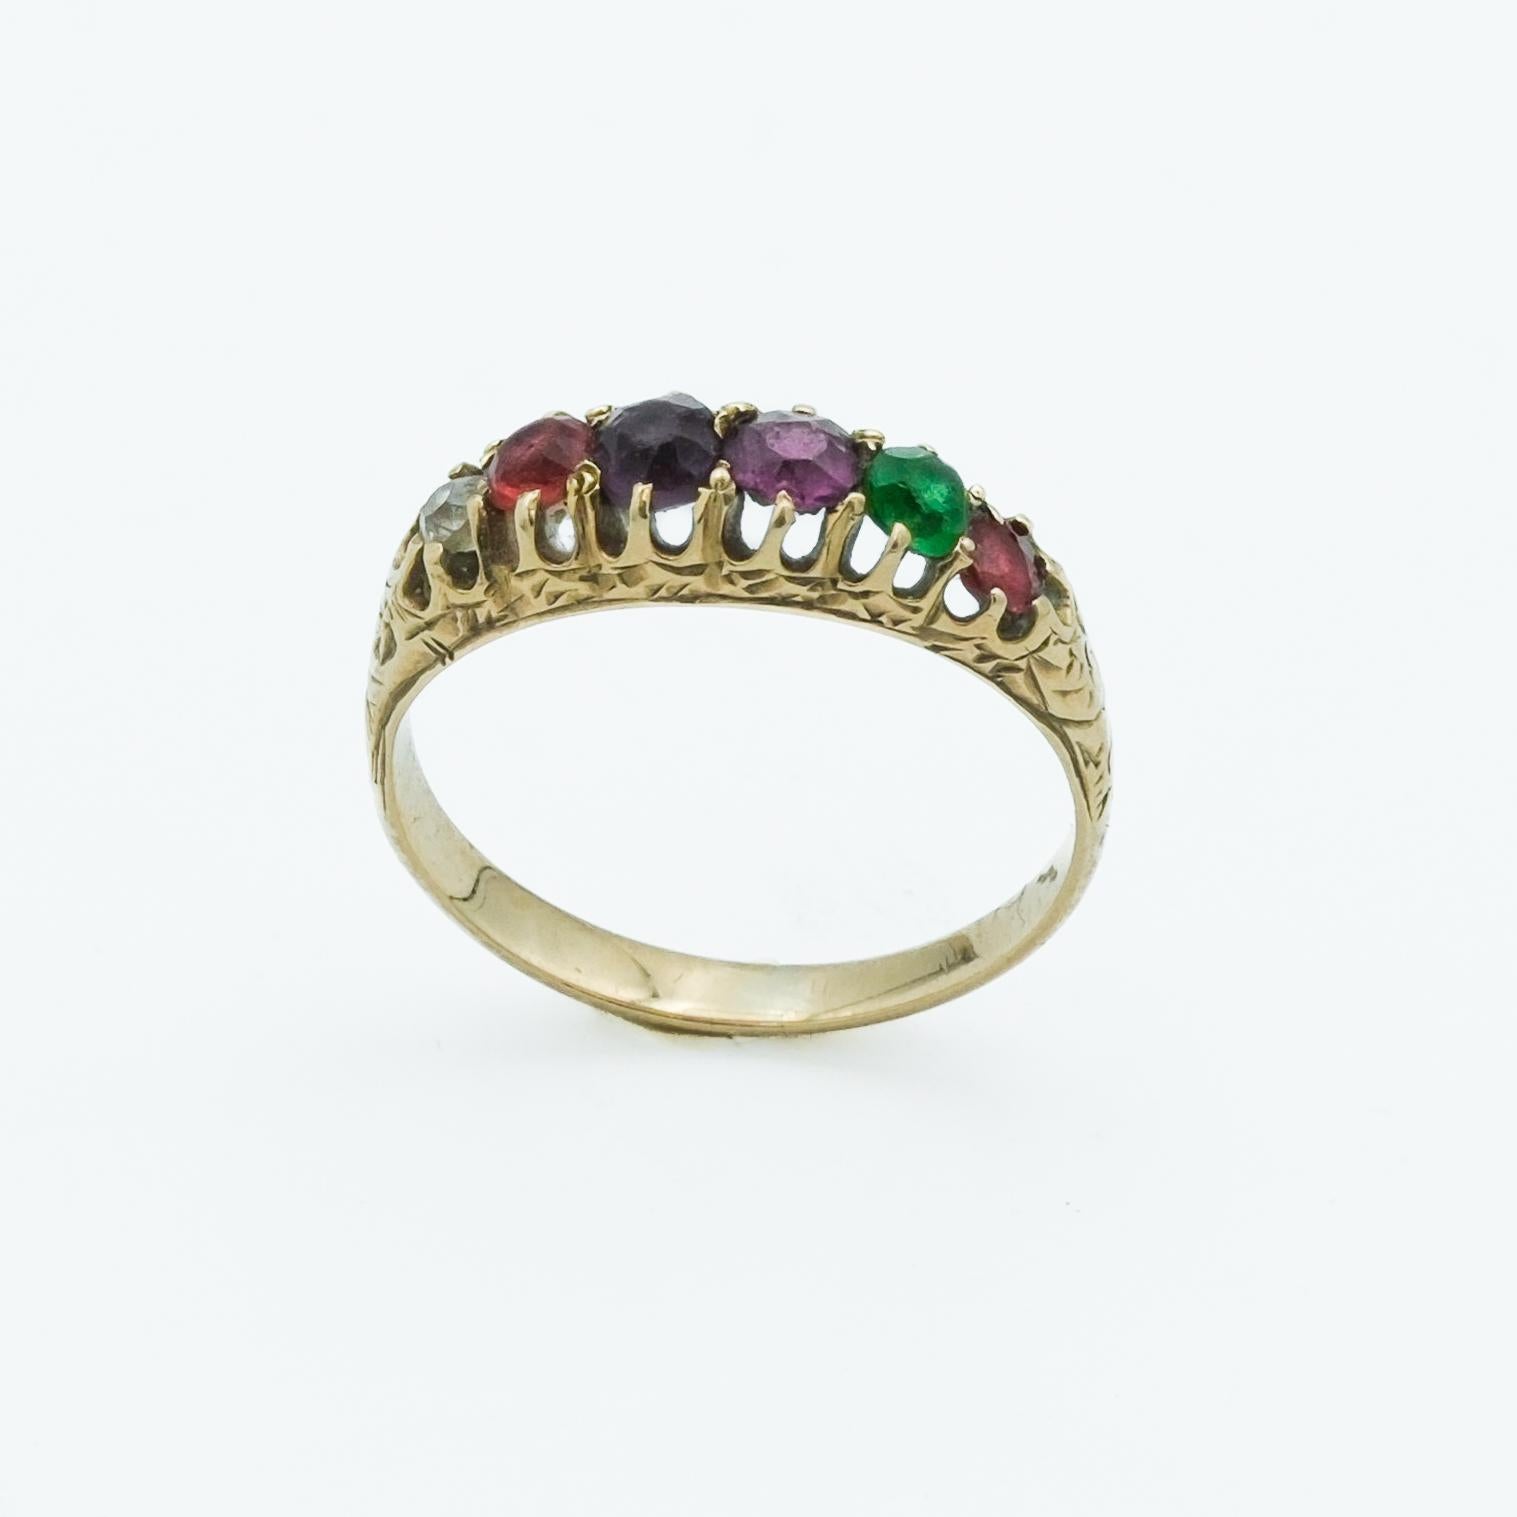 This 14 Karat yellow gold ring from the Victorian era is a distinctive example of acrostic jewelry, which was particularly beloved for its sentimentality. It features synthetic gemstones whose initial letters spell out the word 'REGARD' - Ruby,